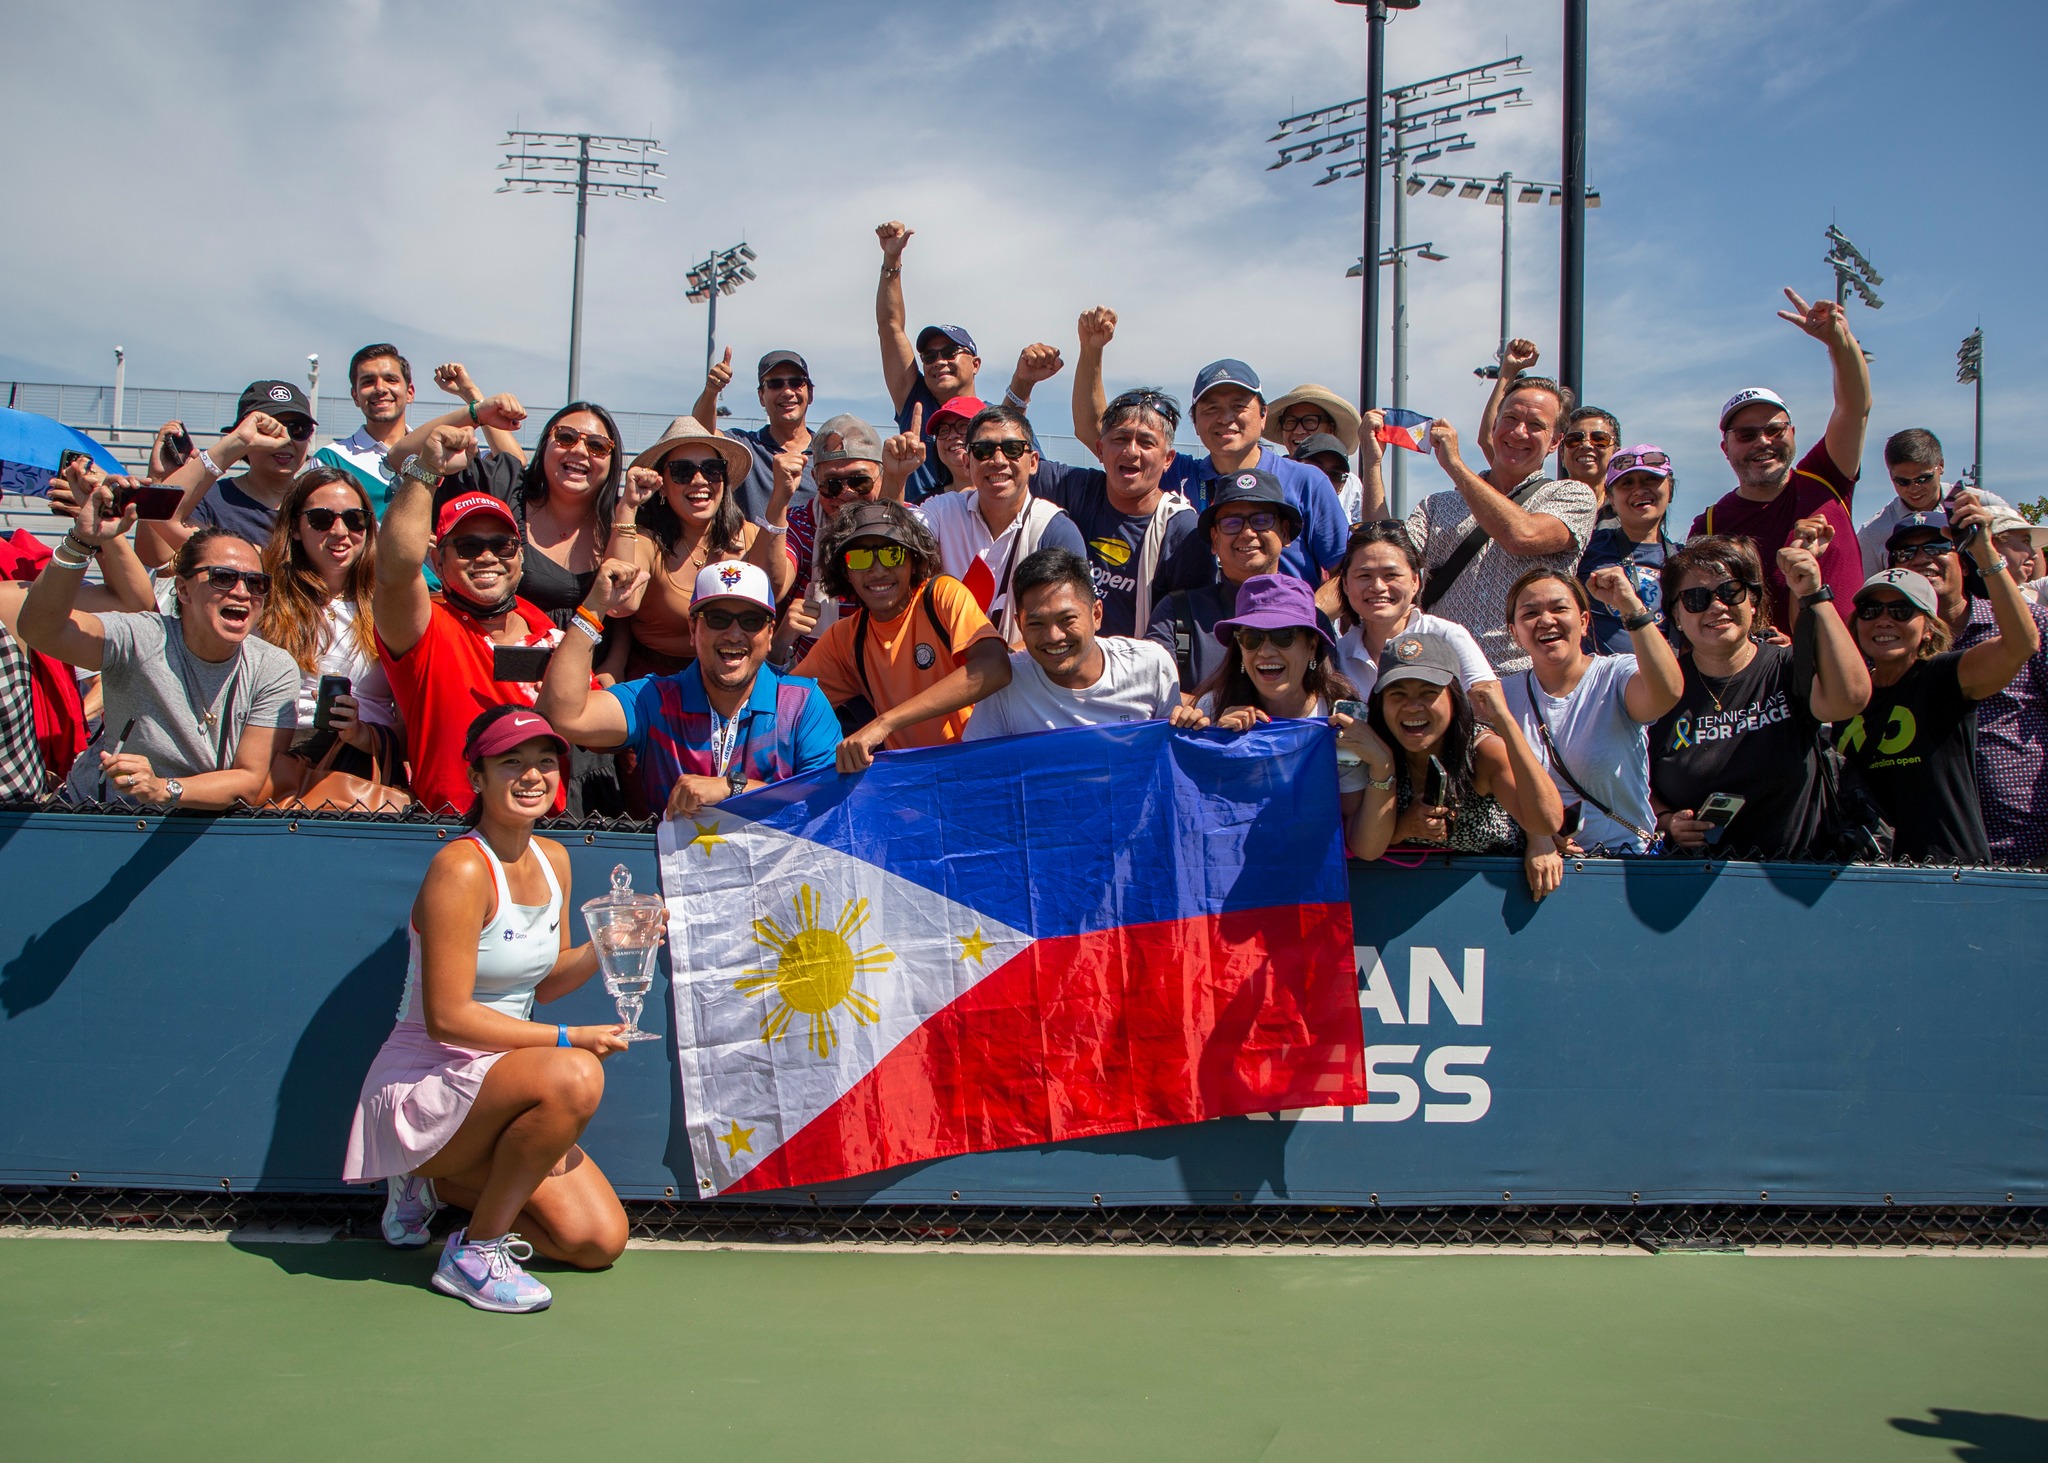 Alex Eala (photo below) always had her eyes on the prize. She then poses with her biggest support system, (from left, front row) father Mike, brother Miko and mom Rizza, together with the Philippine flag and delirious Filipino fans. —PHOTOS BY KEATS LONDON